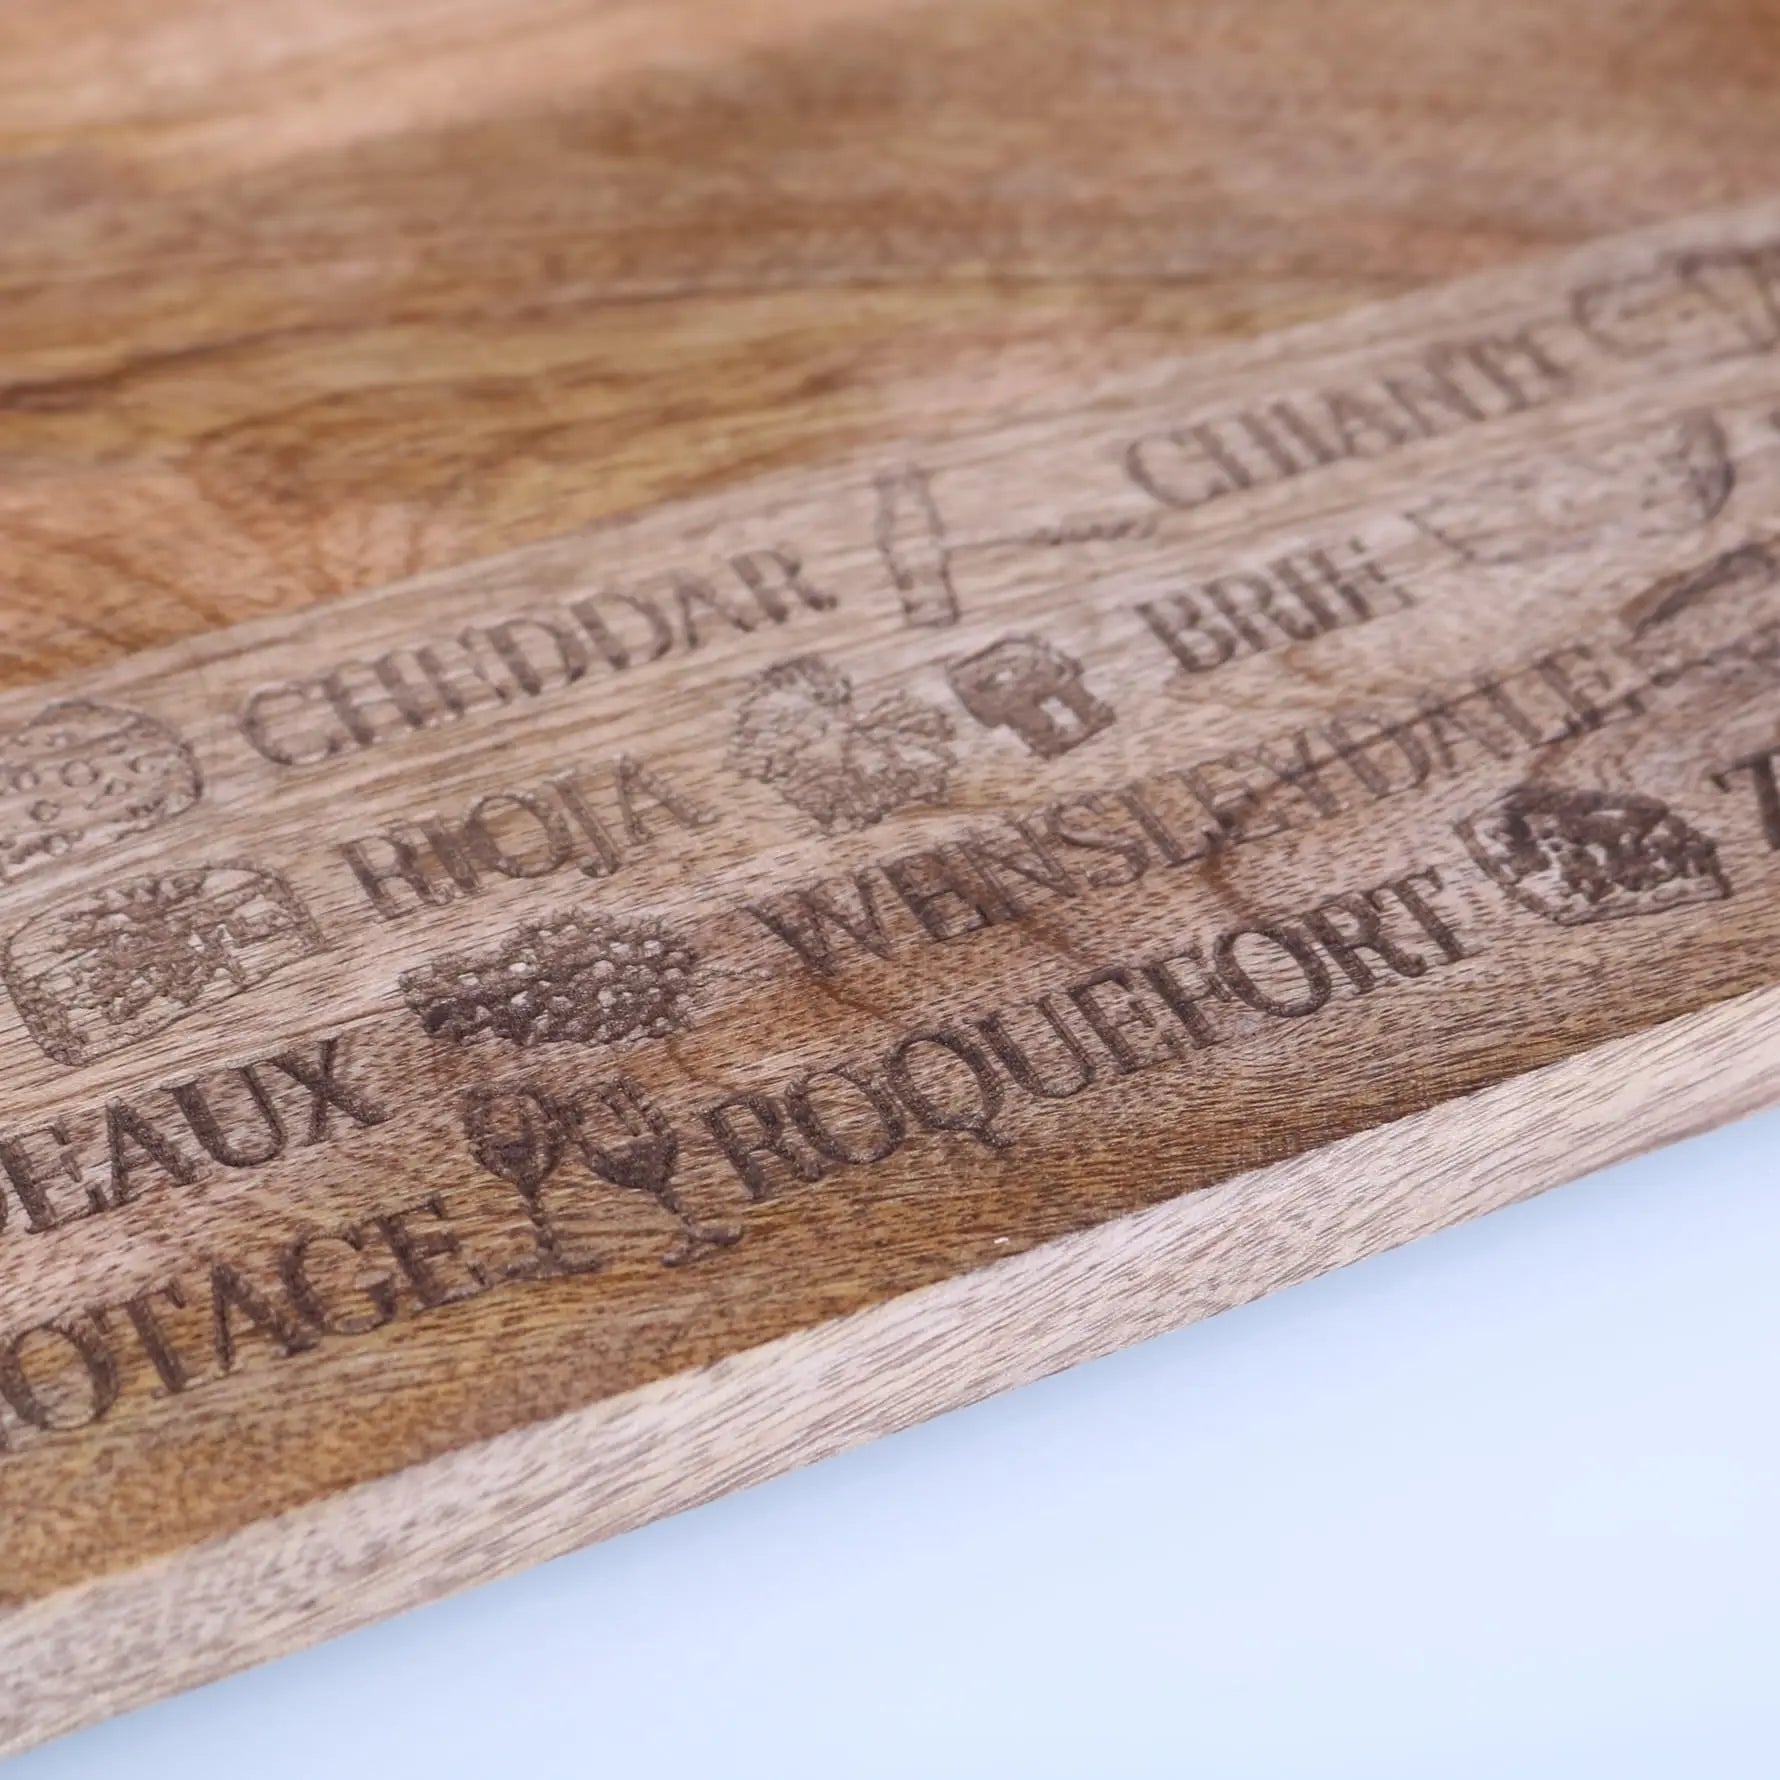 Engraved Serving Board Cheese and Wine - Words Variant Closeup of Carving